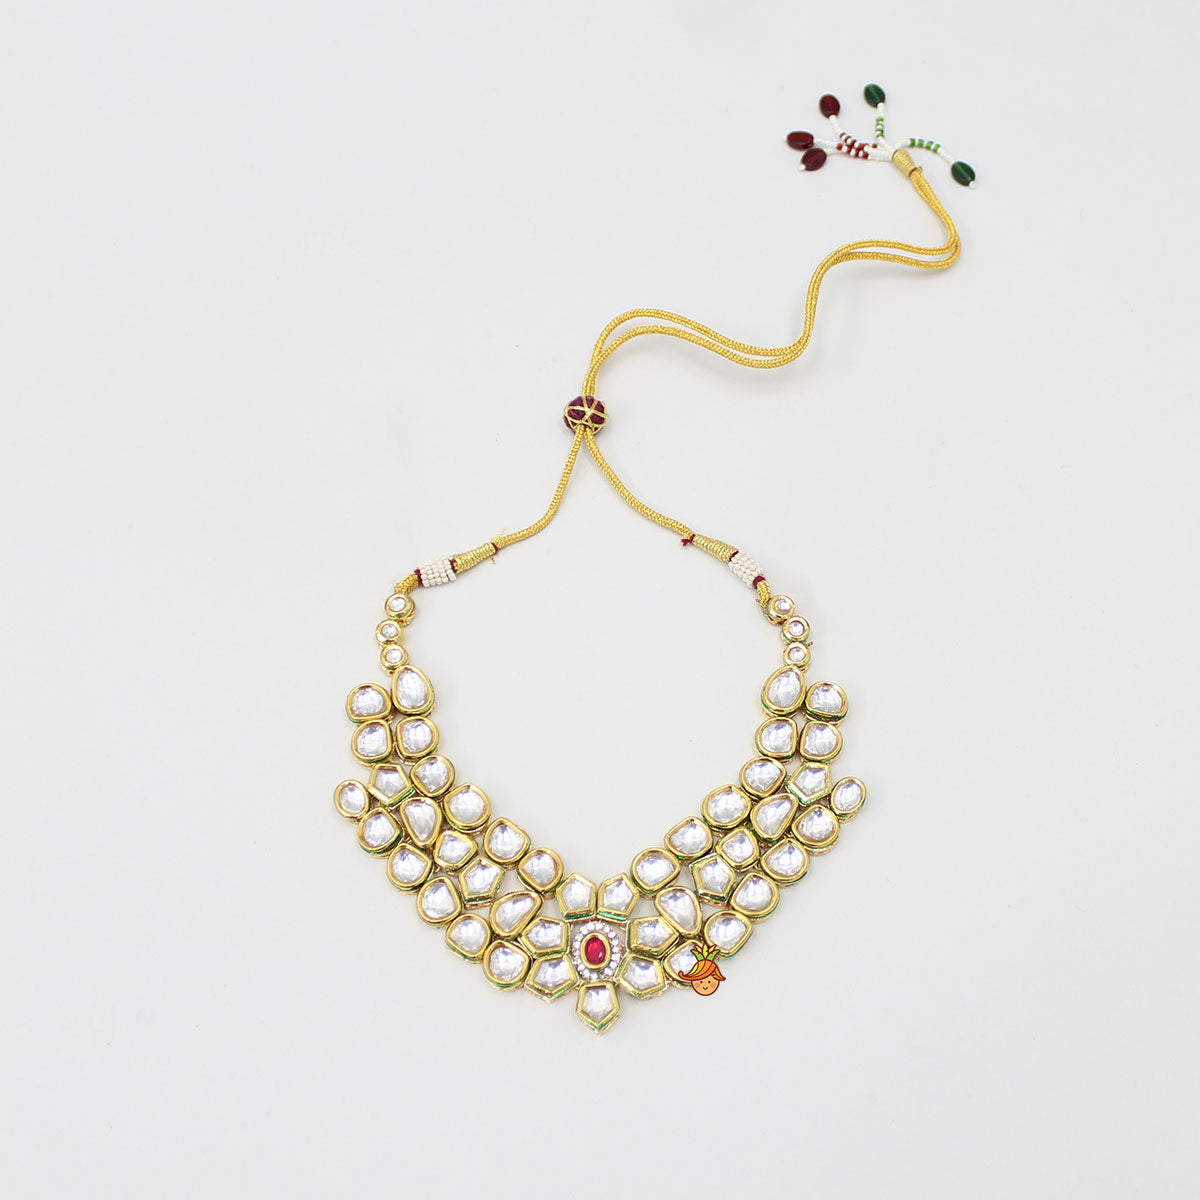 Elegant Pink And White Stone Studded Necklace With Earrings And Maang Tikka